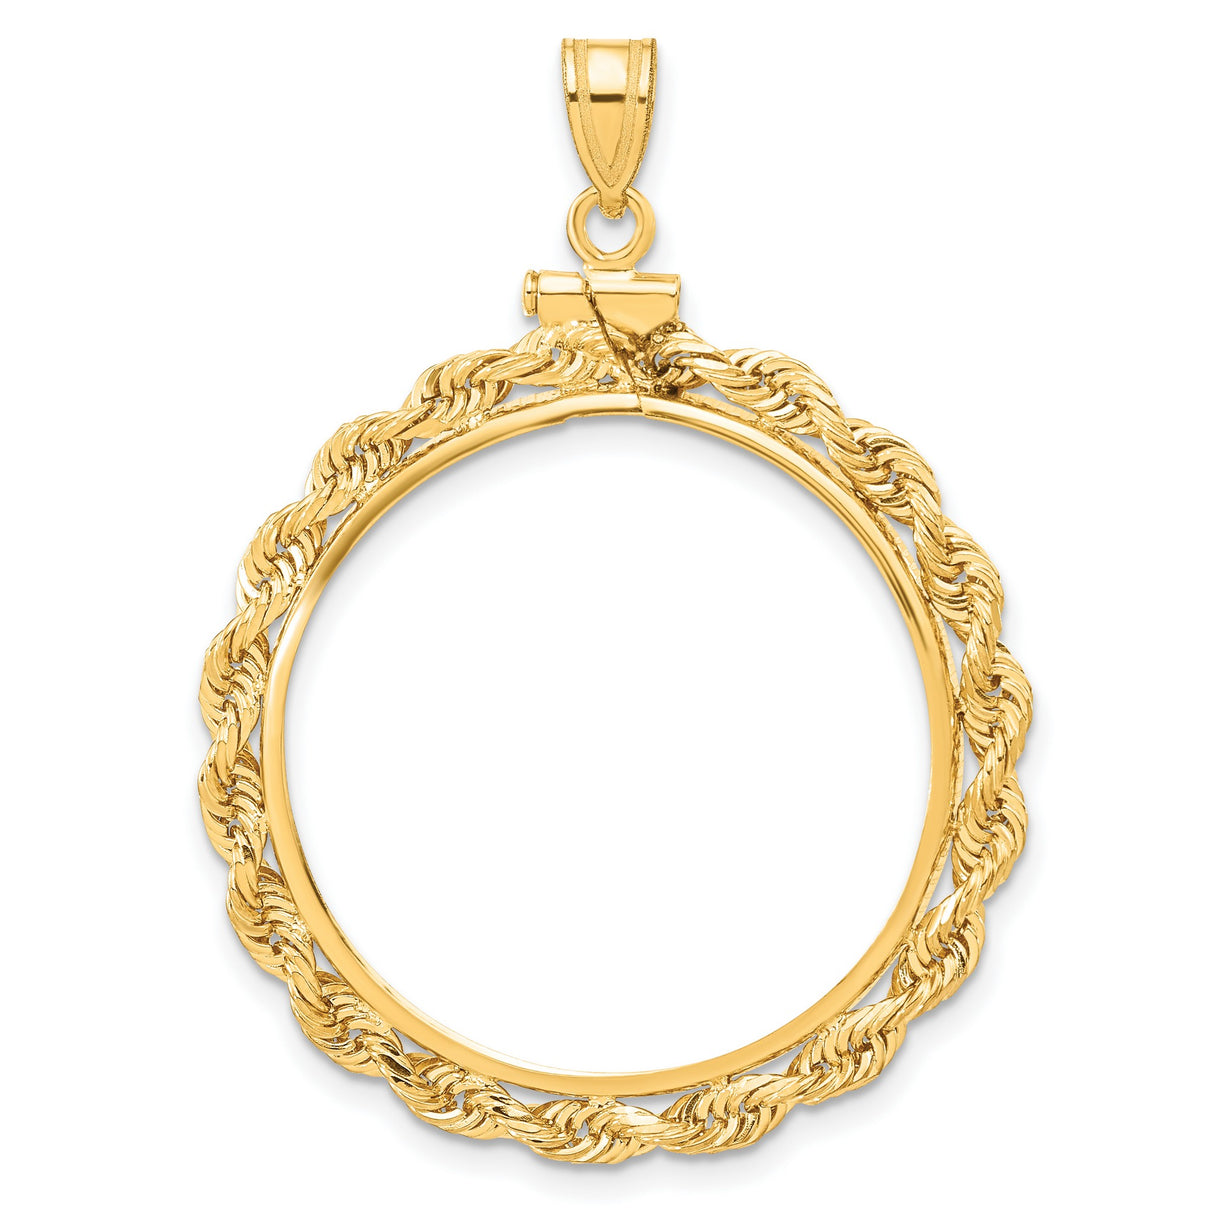 1/2 oz 50 Yuan Panda Screw Top Knotted Rope Coin Bezel in 14k Yellow Gold